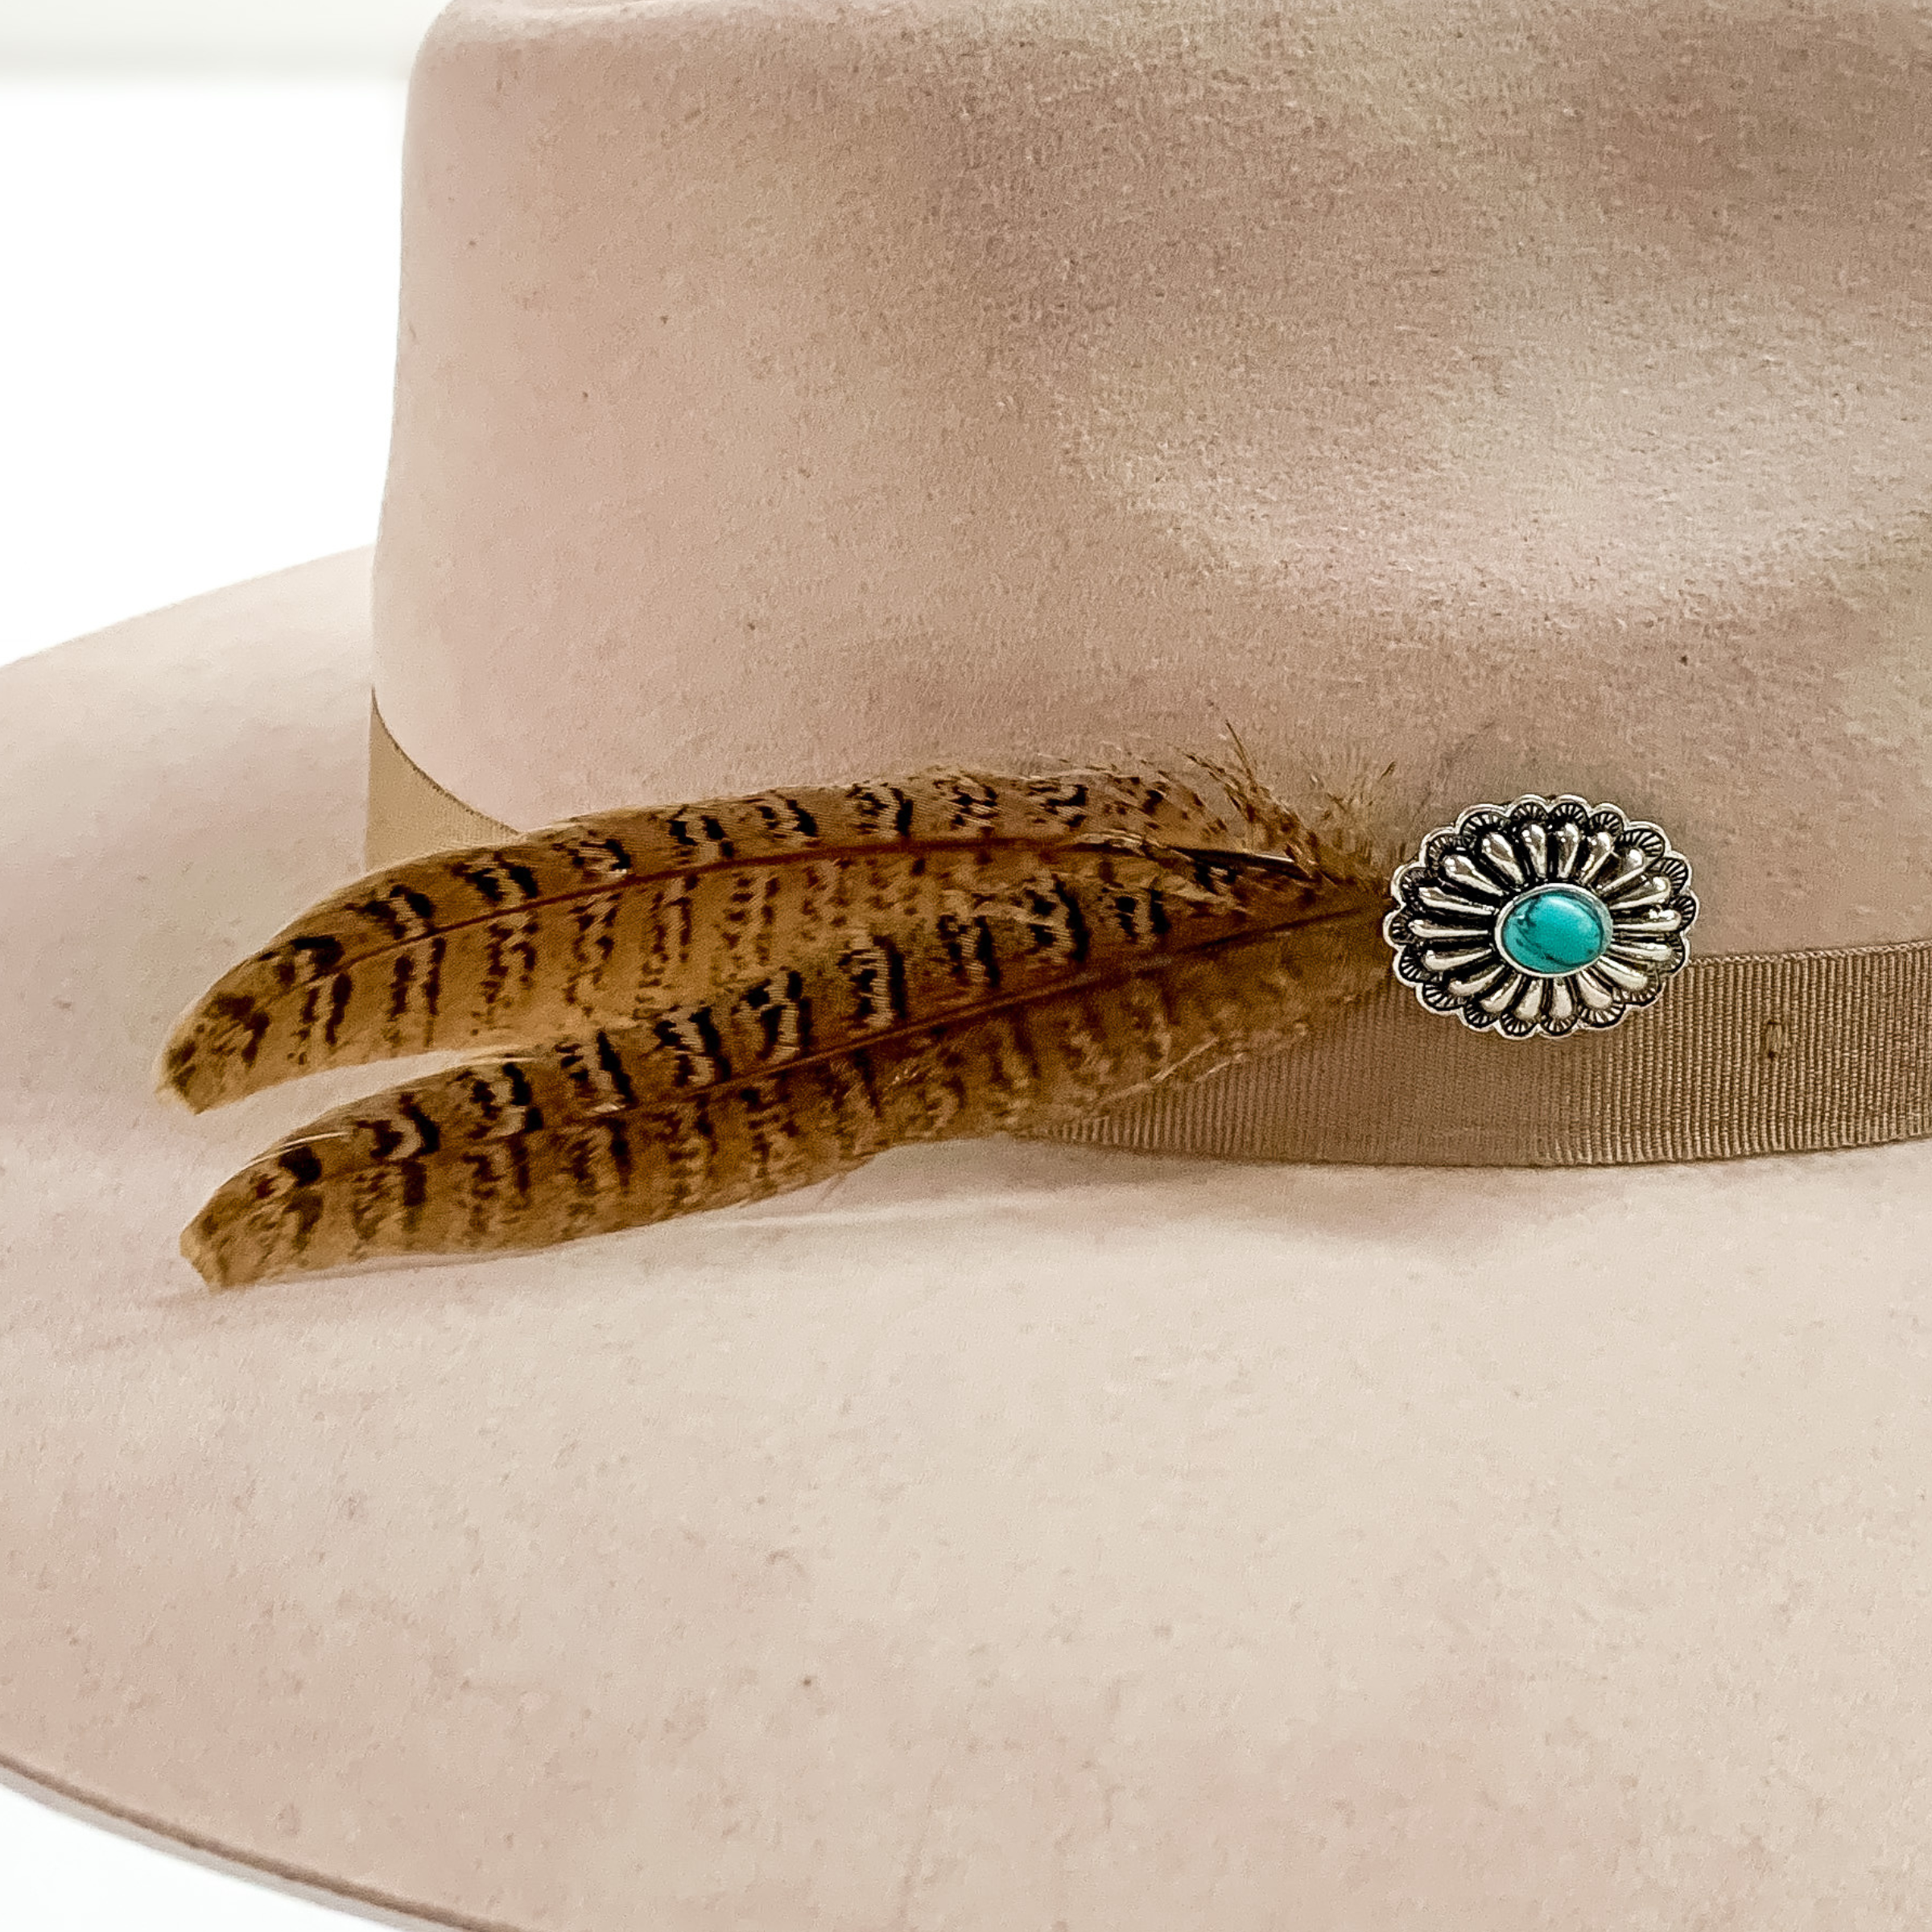 Silver, oval concho with center turquoise stone and two brown feathers. This hat pin is pictured on a beige colored hat on a white background.